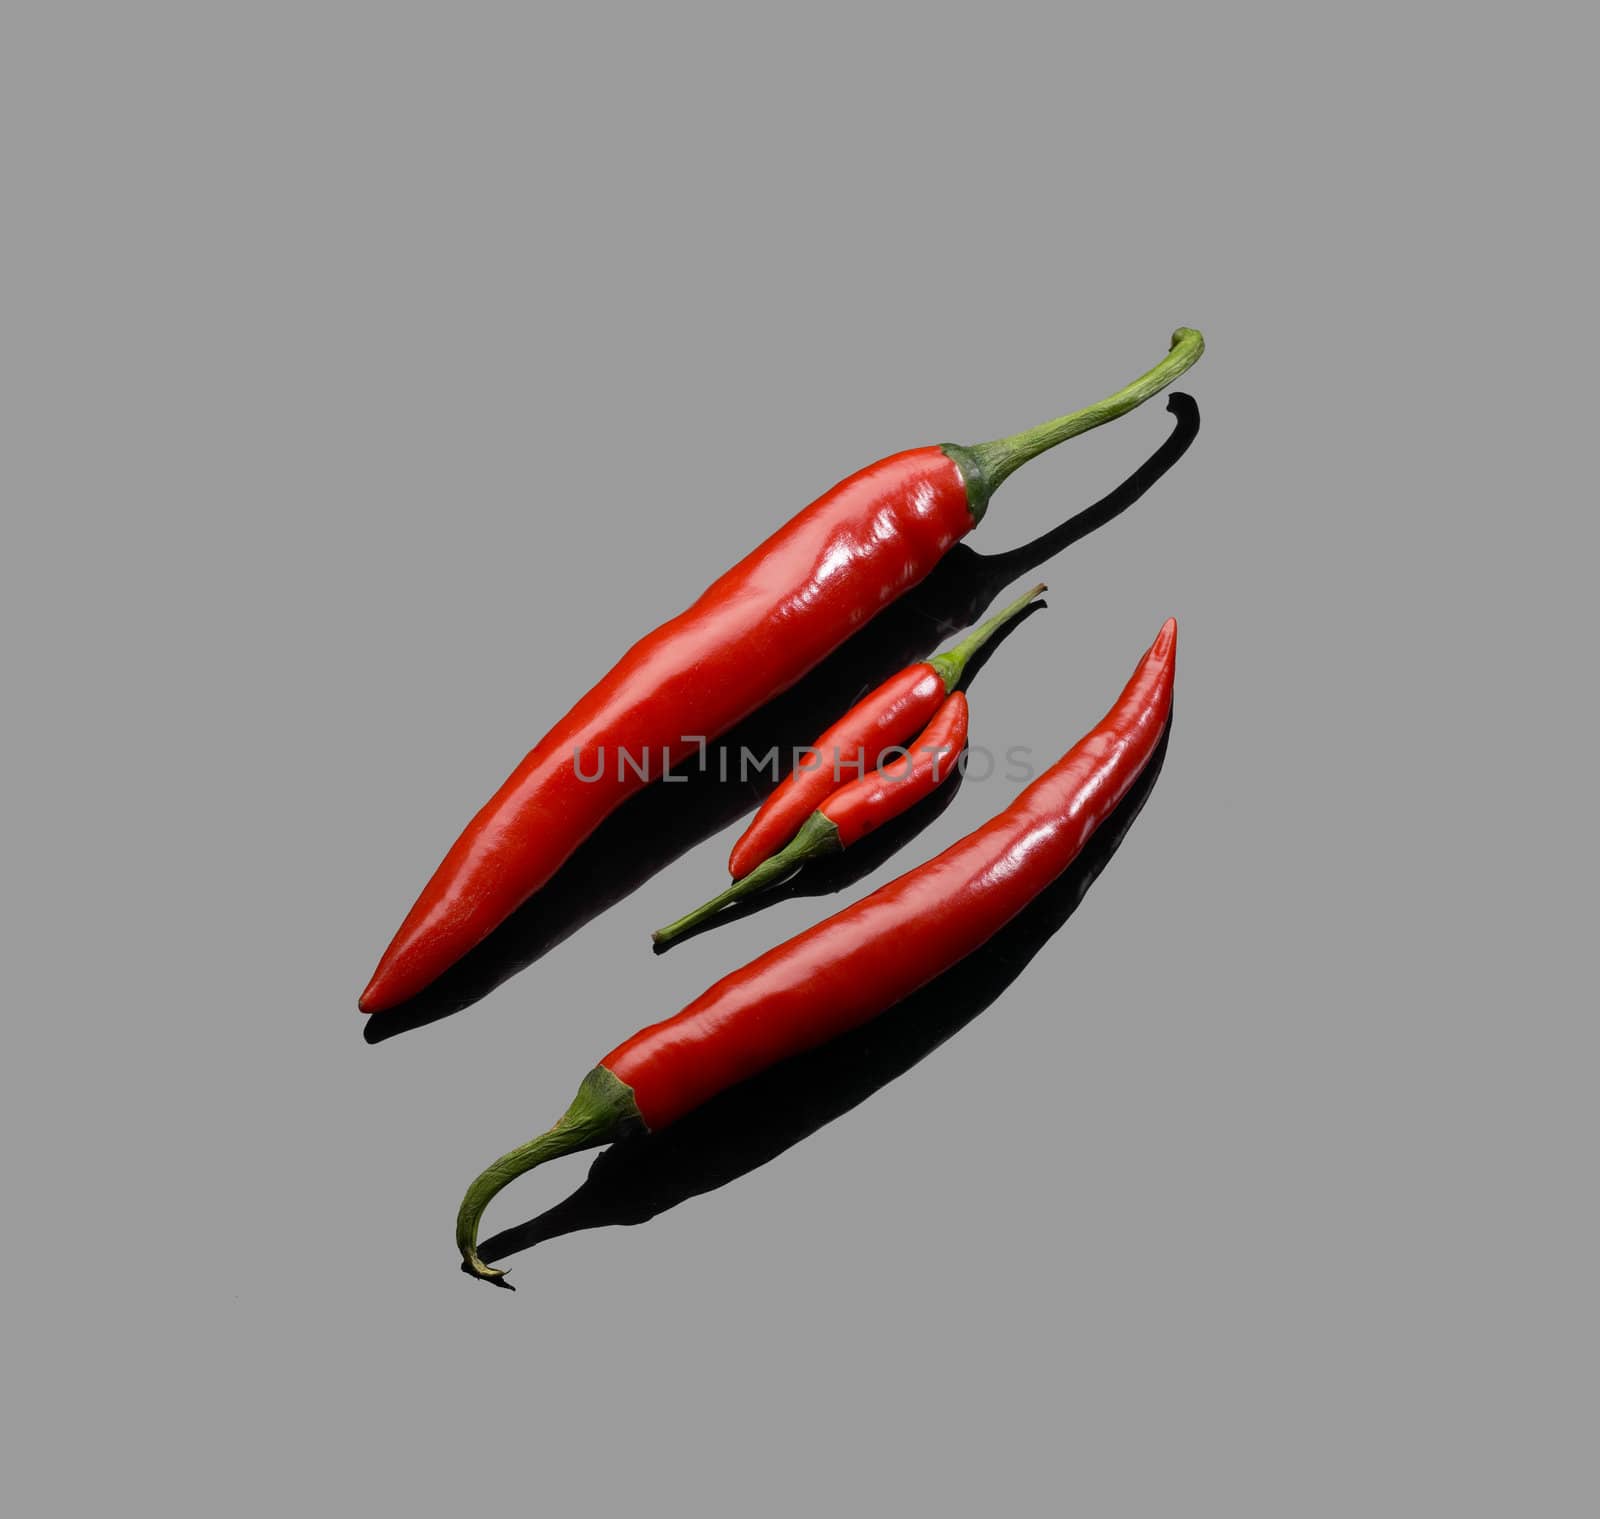 red chili peppers by keko64